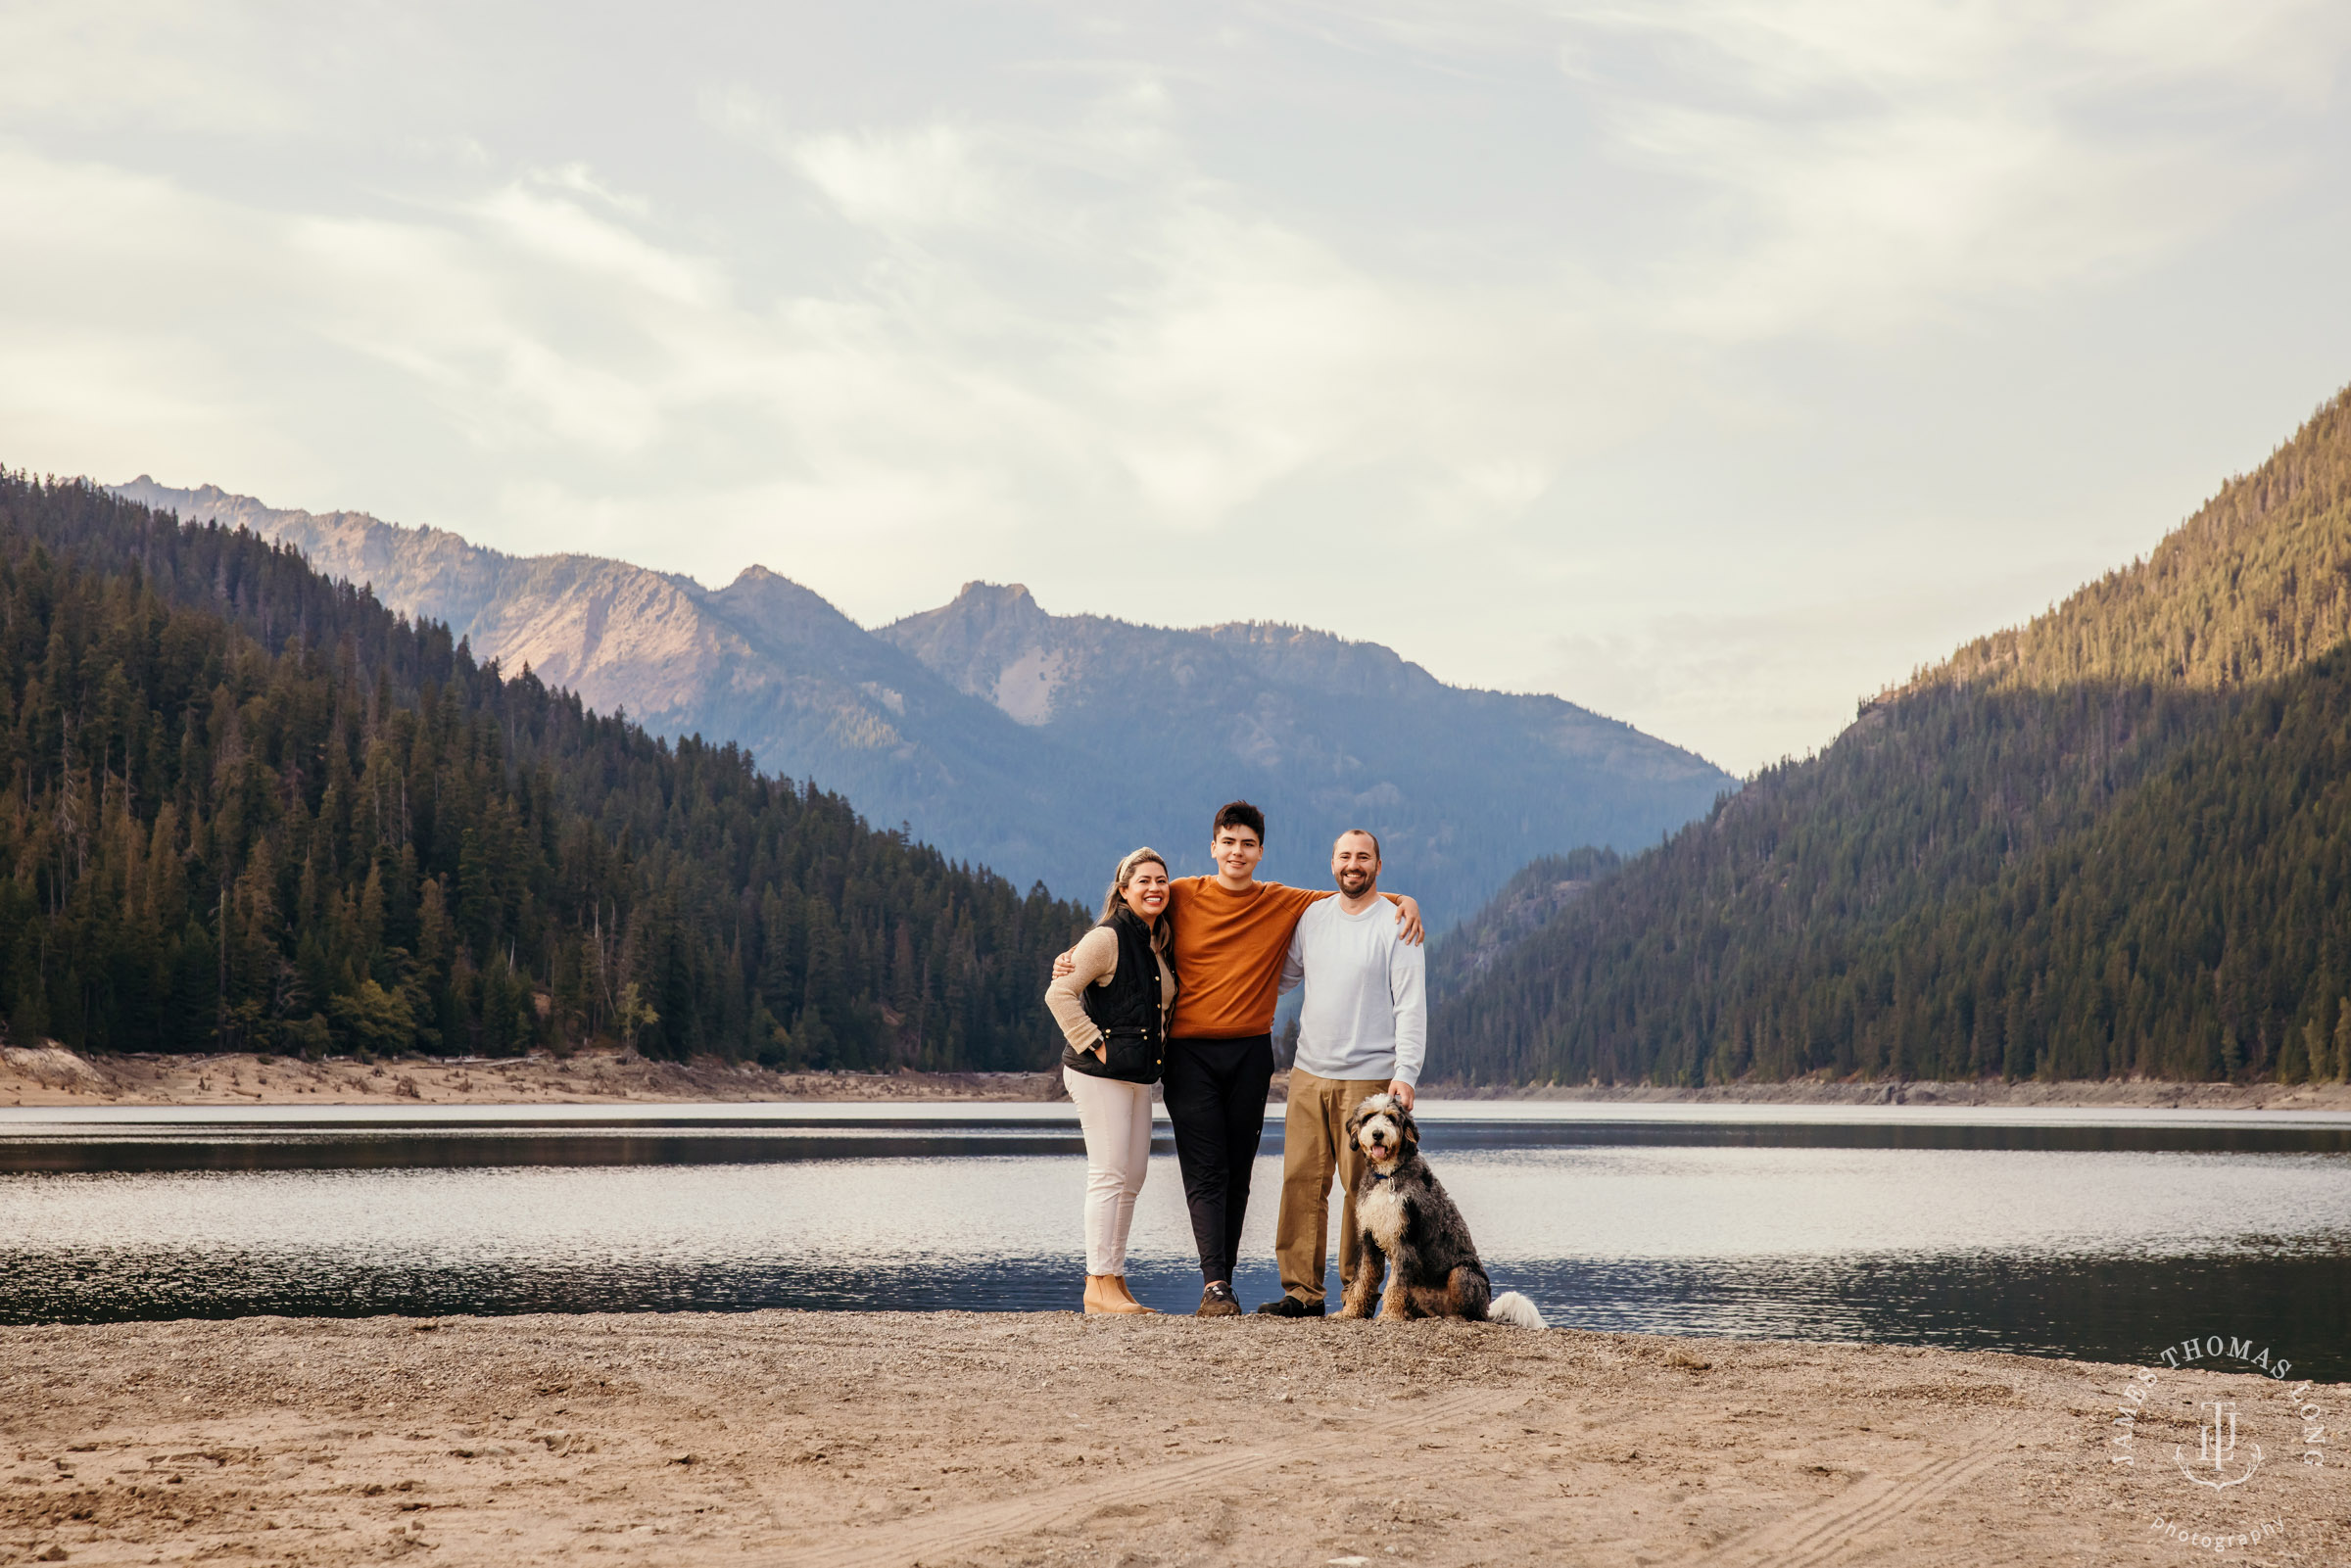 Adventure family photography session in the cascade mountains by Snoqualmie adventure family photographer James Thomas Long Photography